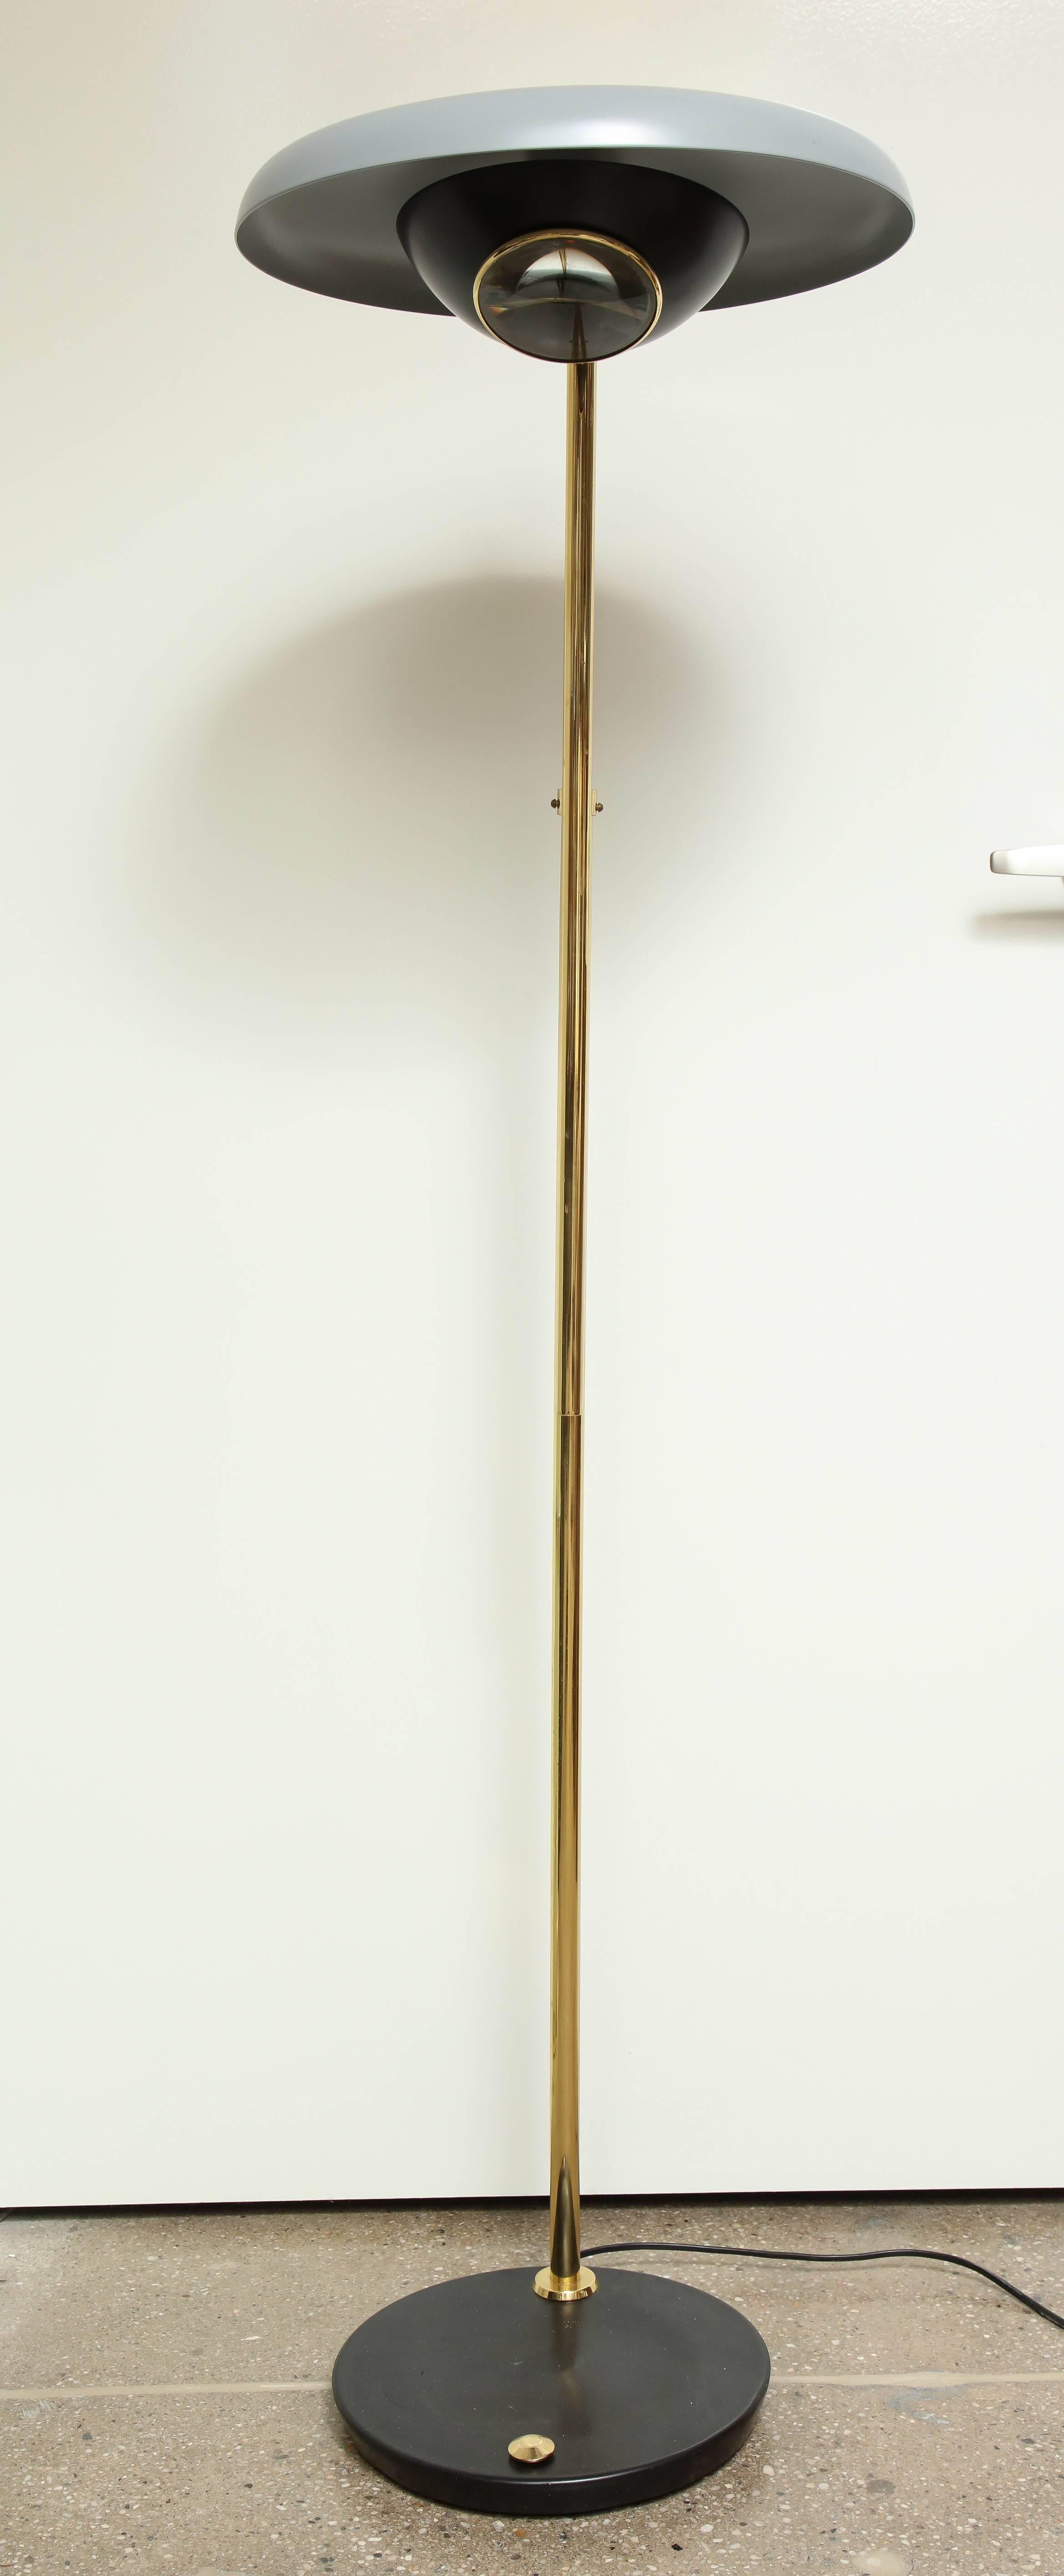 Brass Oscar Torlasco Floor Lamp, Made by Lumi in Italy, 1955 For Sale